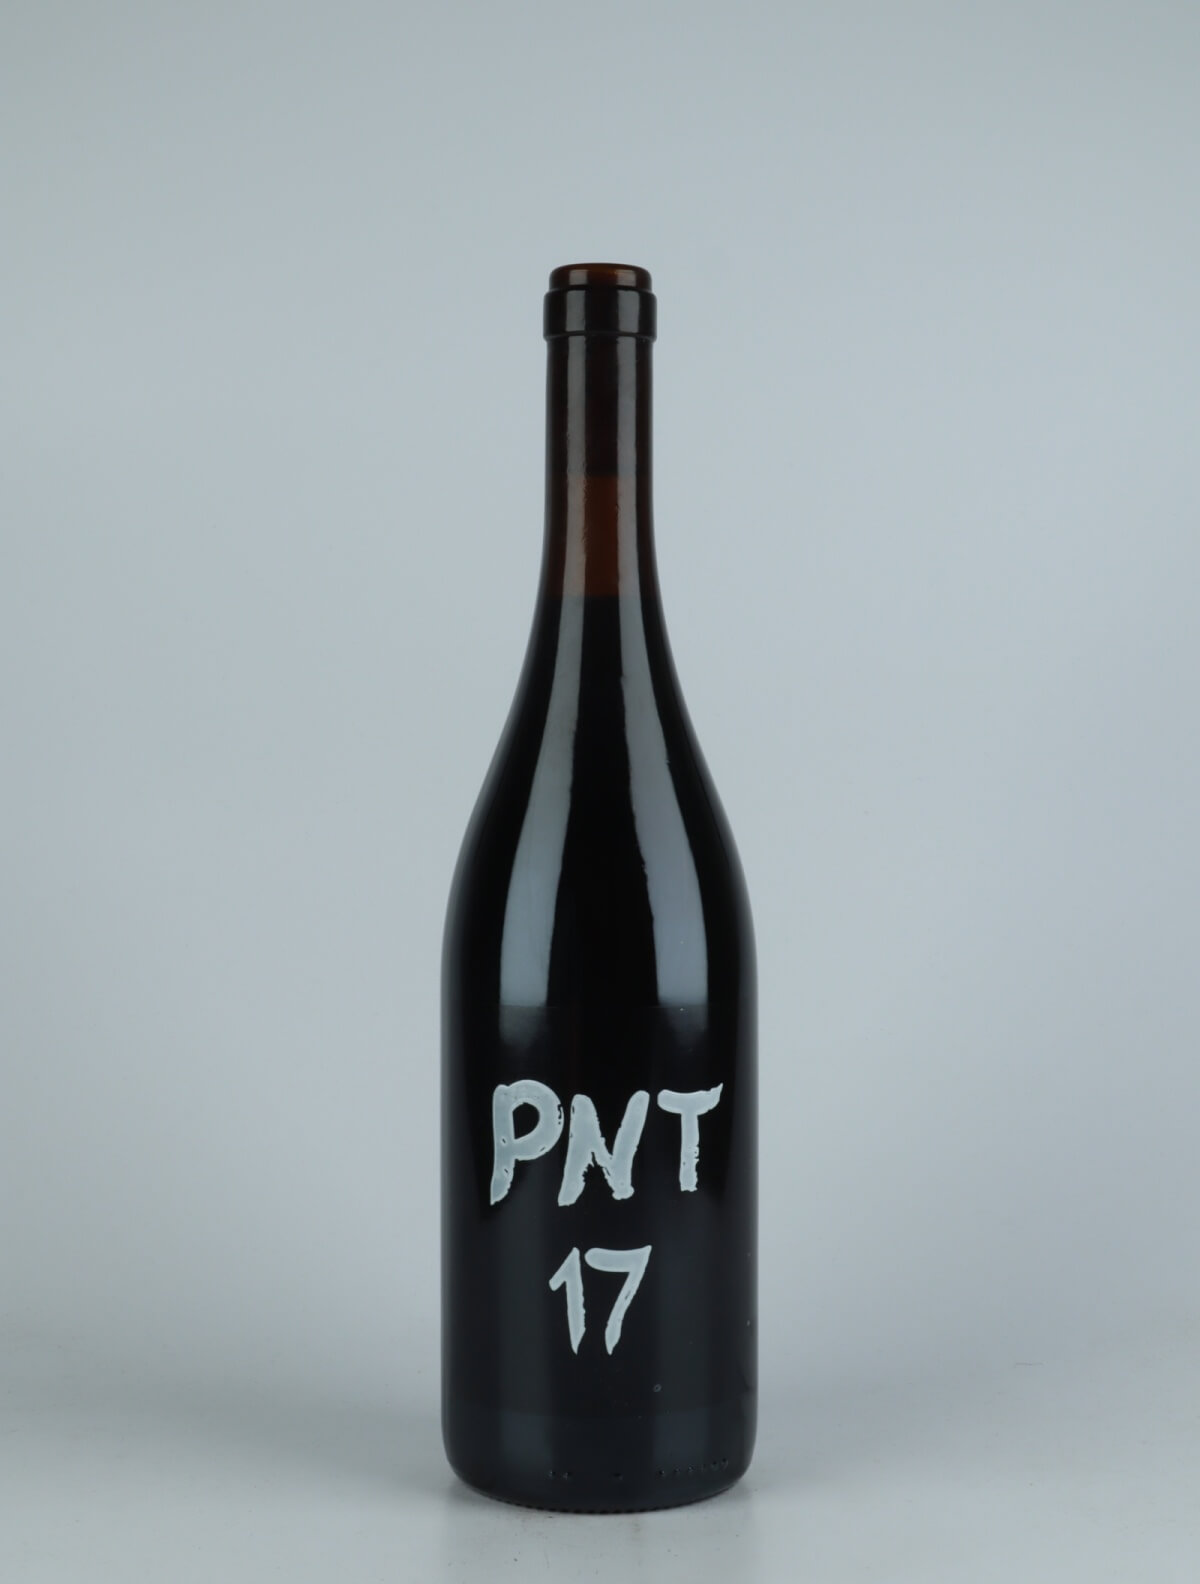 A bottle 2017 PNT Red wine from Le Coste, Lazio in Italy